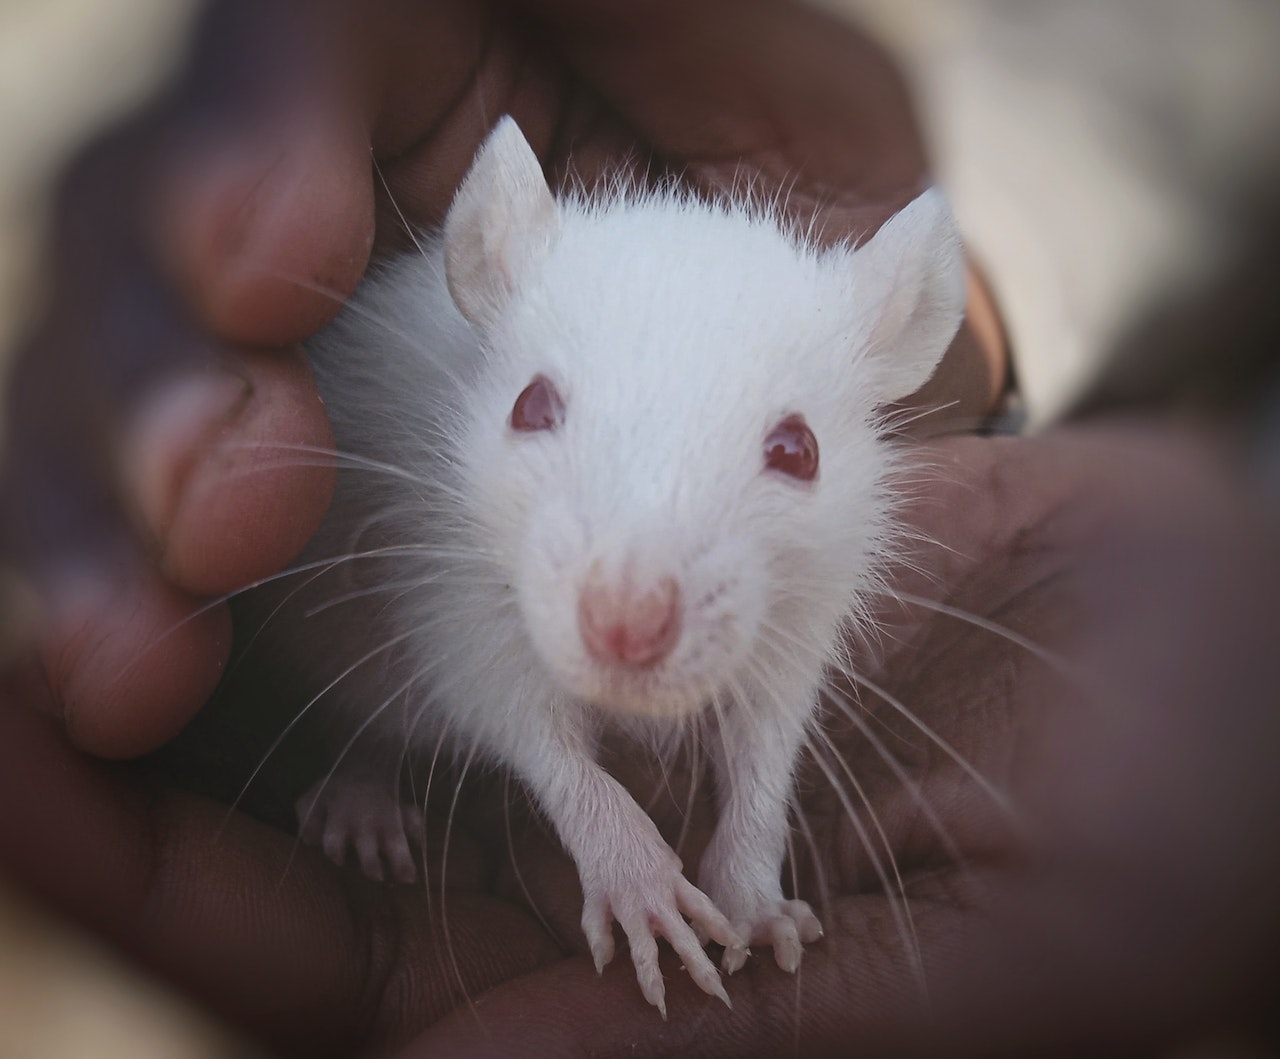 Cute White Rat on Person's Hands